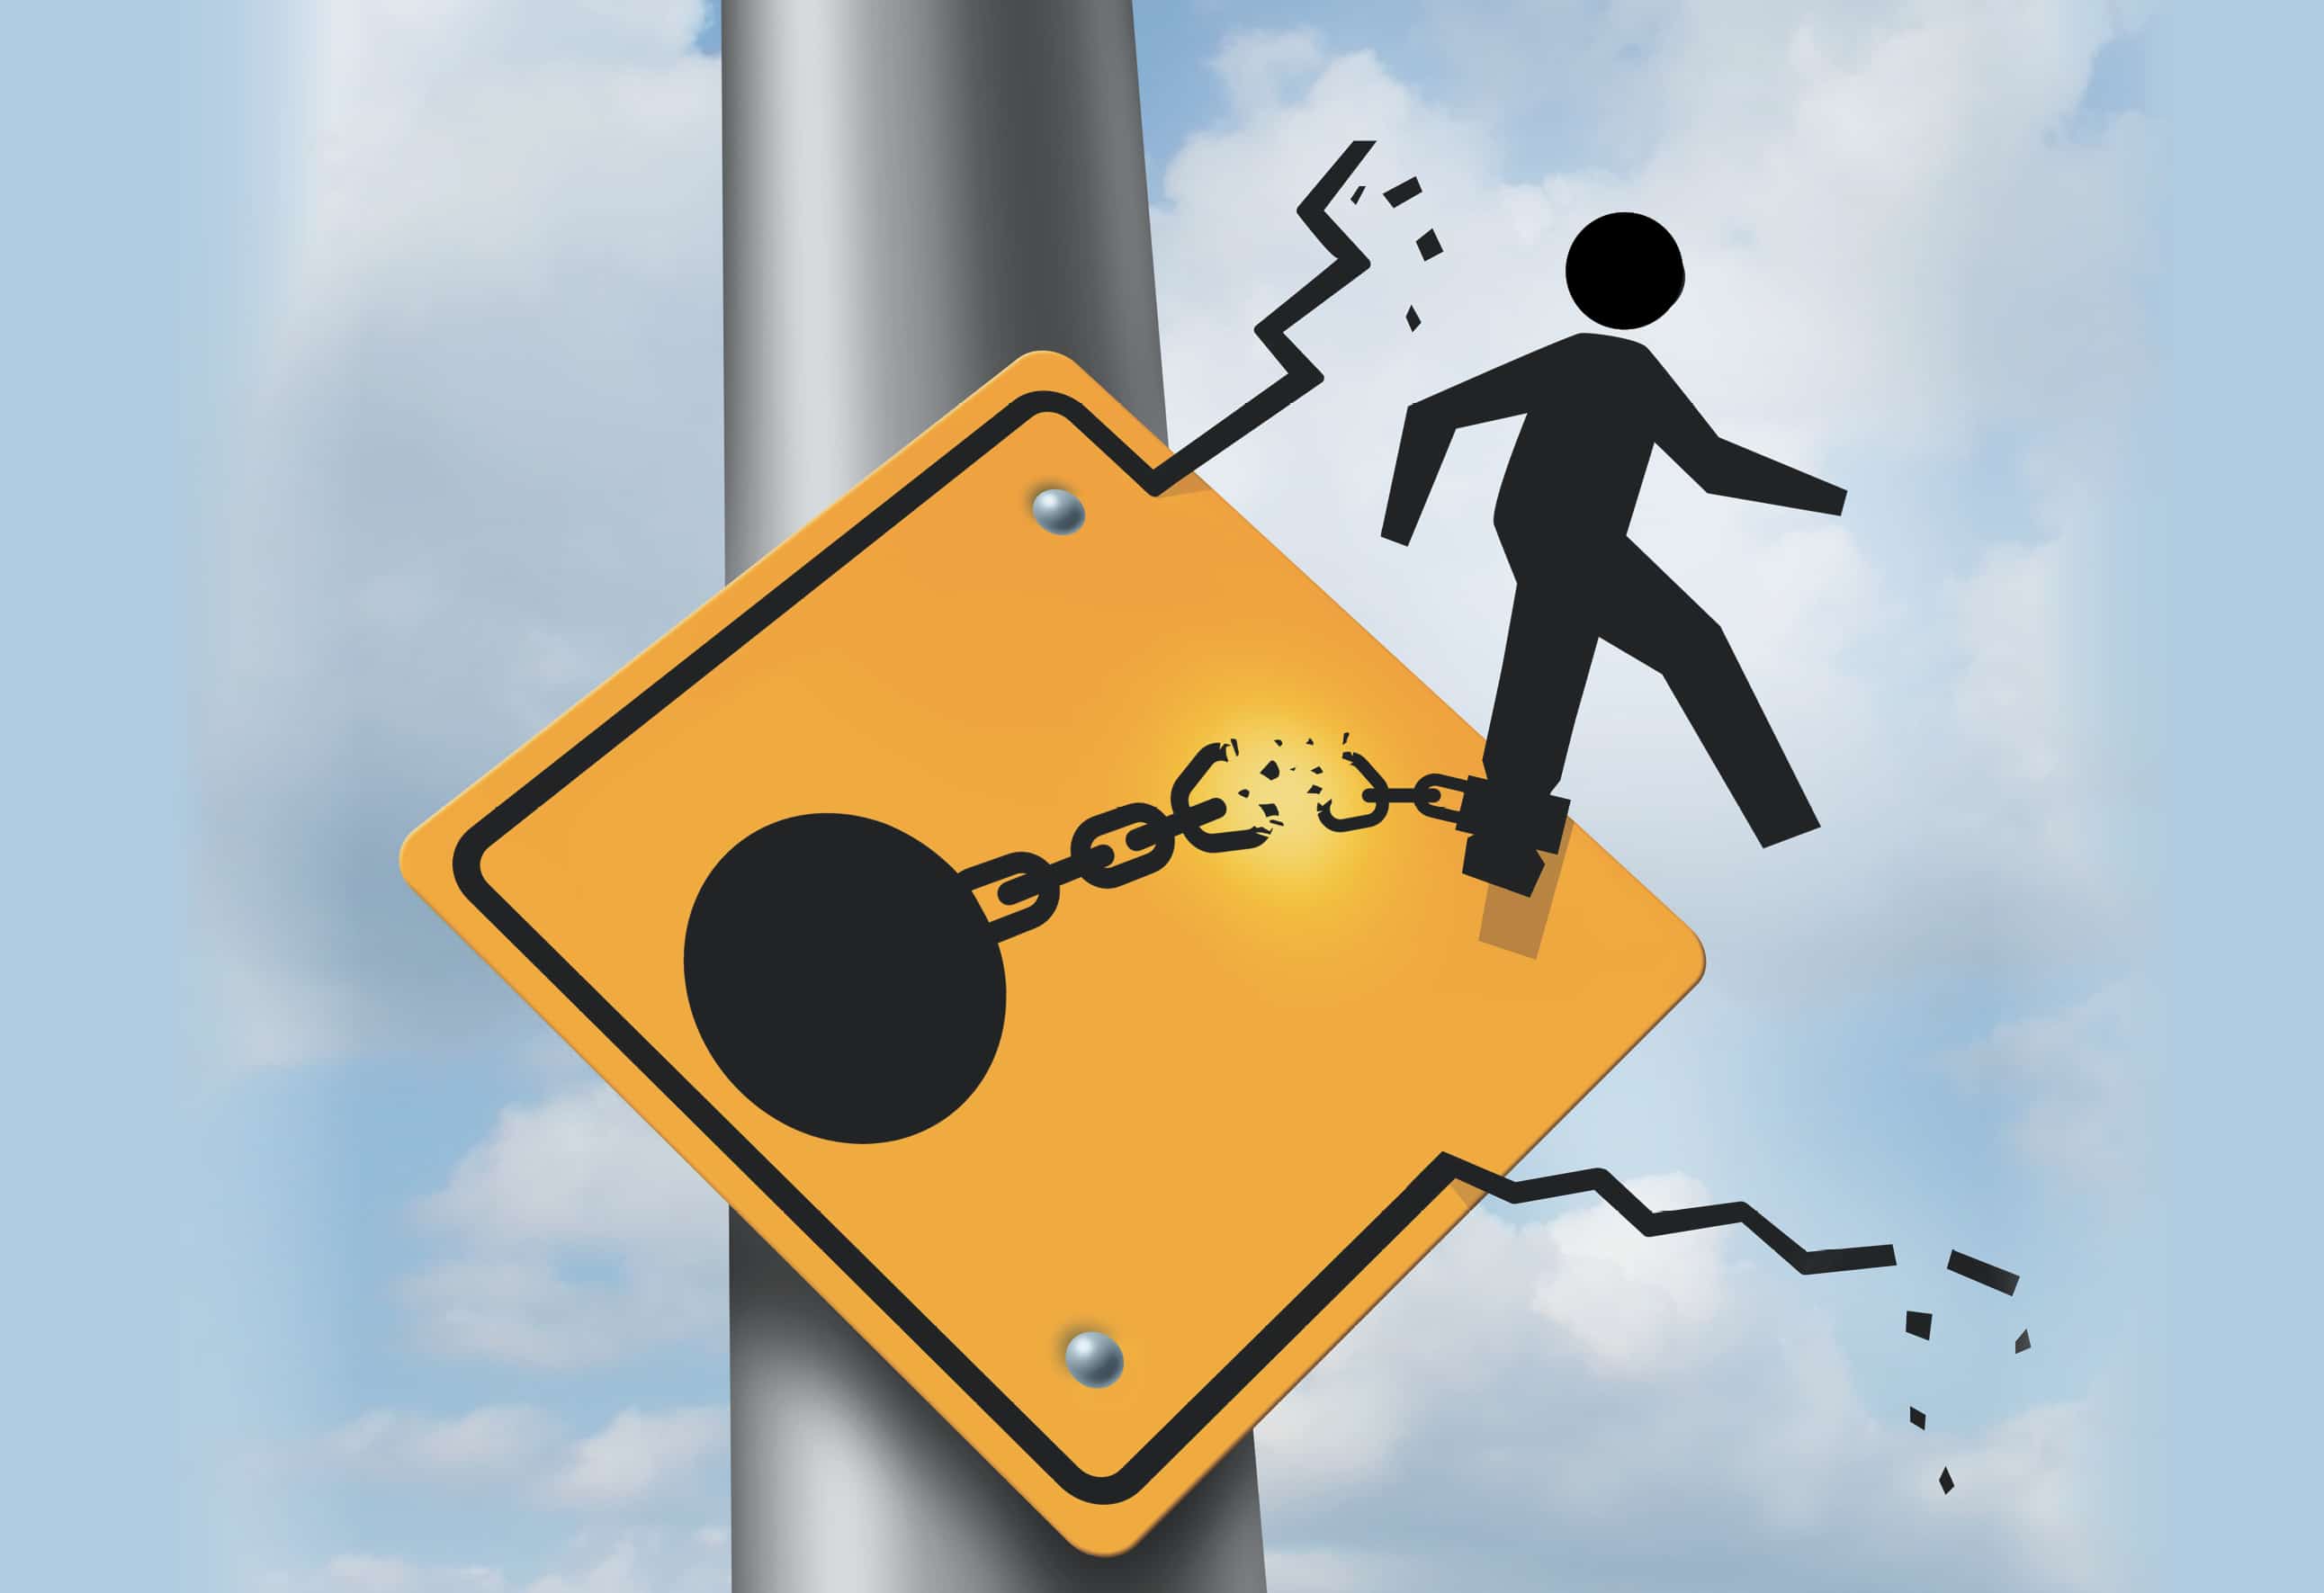 graphic of black figure breaking away from ball and chain on a traffic sign